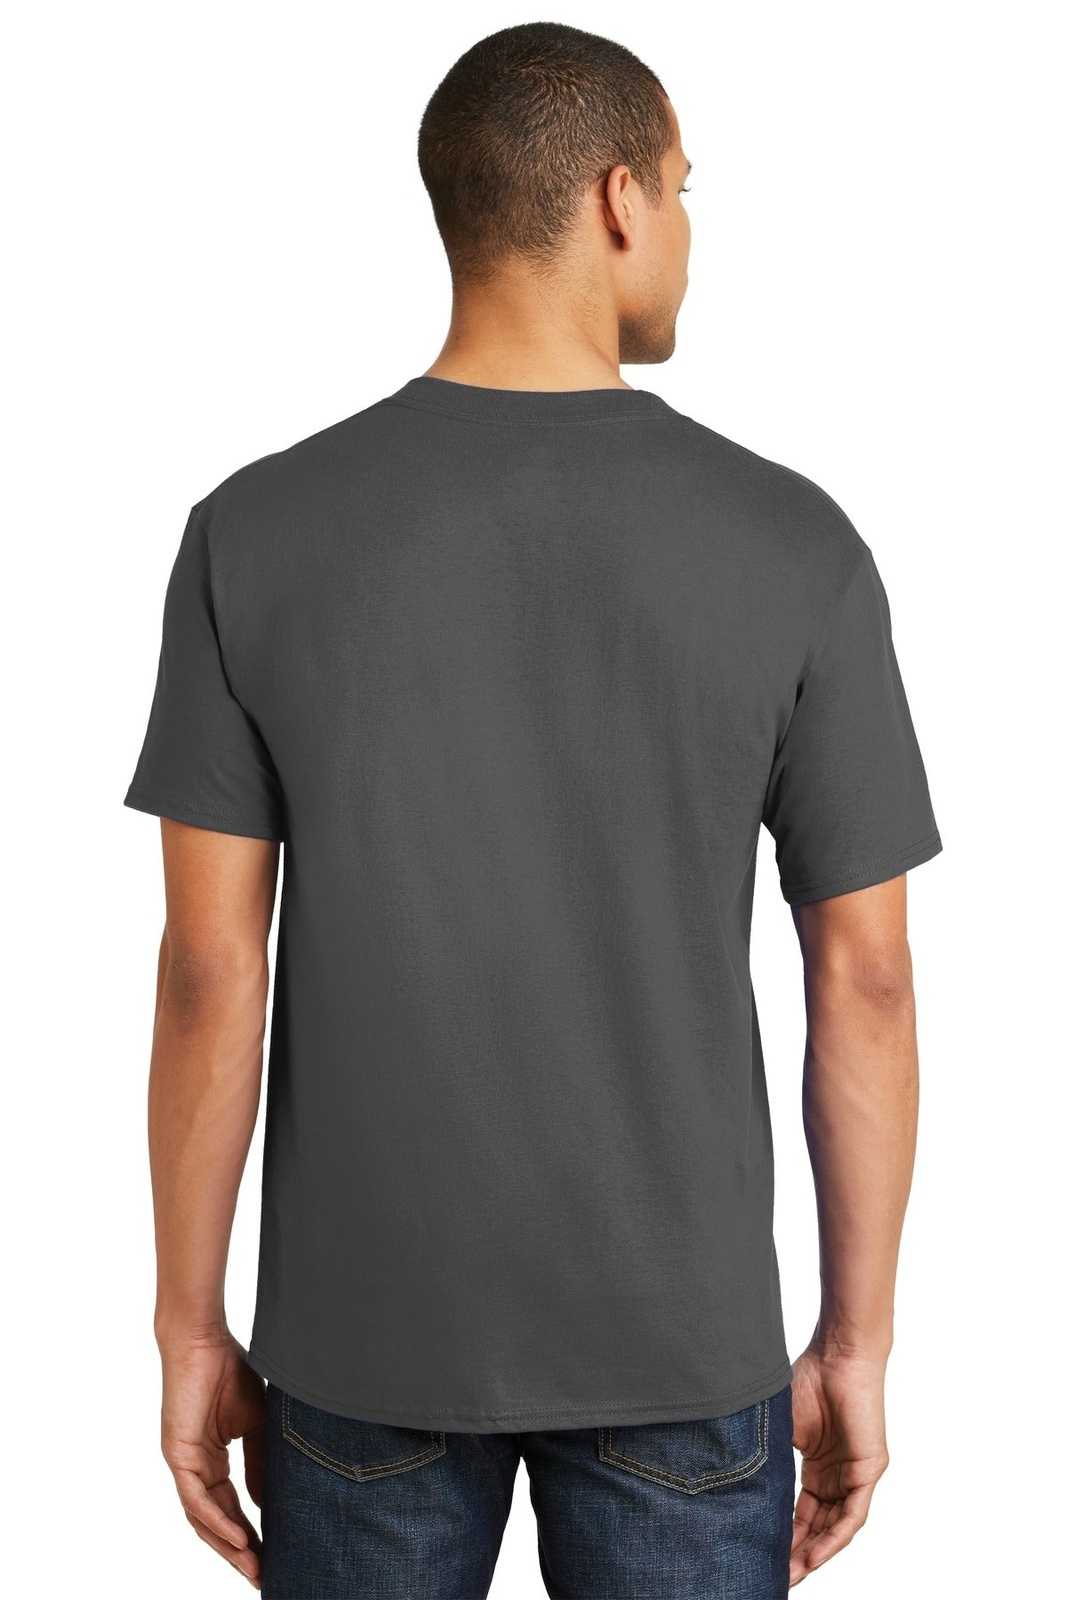 Hanes 5180 Beefy-T 100% Cotton T-Shirt - Smoke Gray - HIT a Double